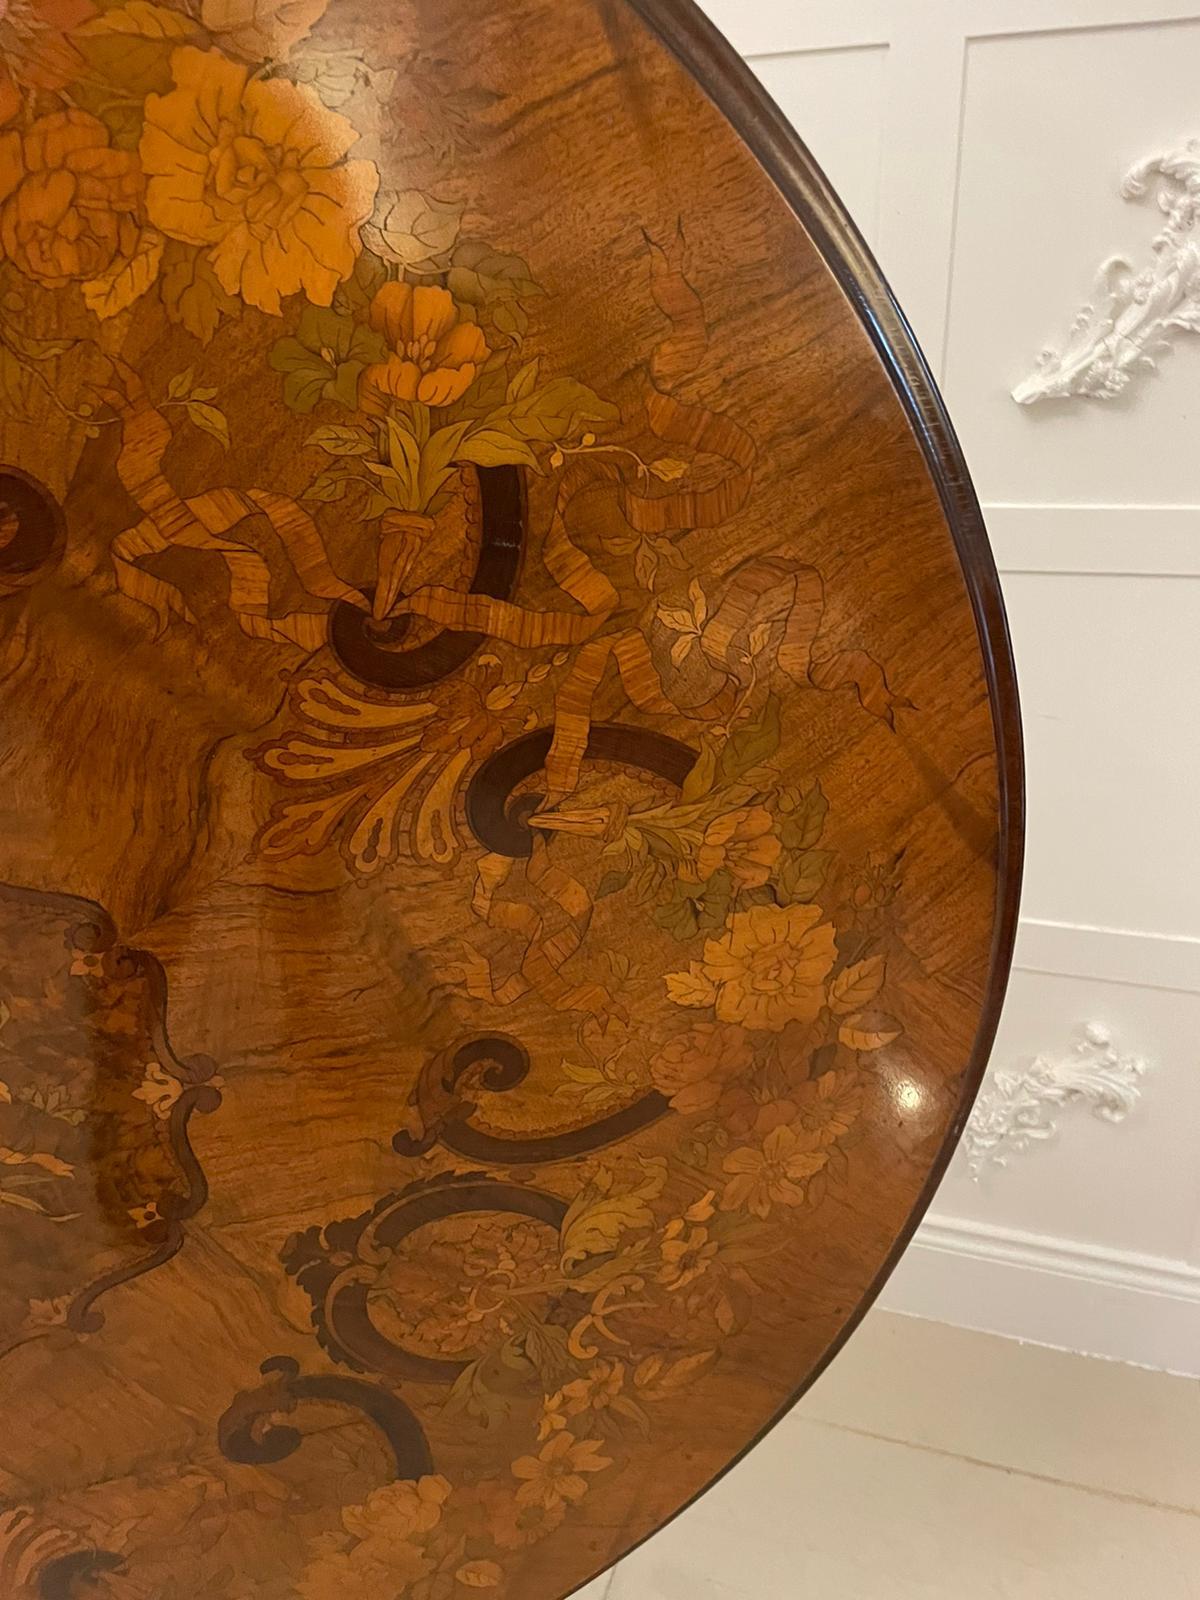 Outstanding quality antique Victorian burr walnut marquetry inlaid centre/dining table having an incredible quality circular burr walnut floral marquetry inlaid top with a thumb moulded edge supported by a quality carved solid walnut turned column